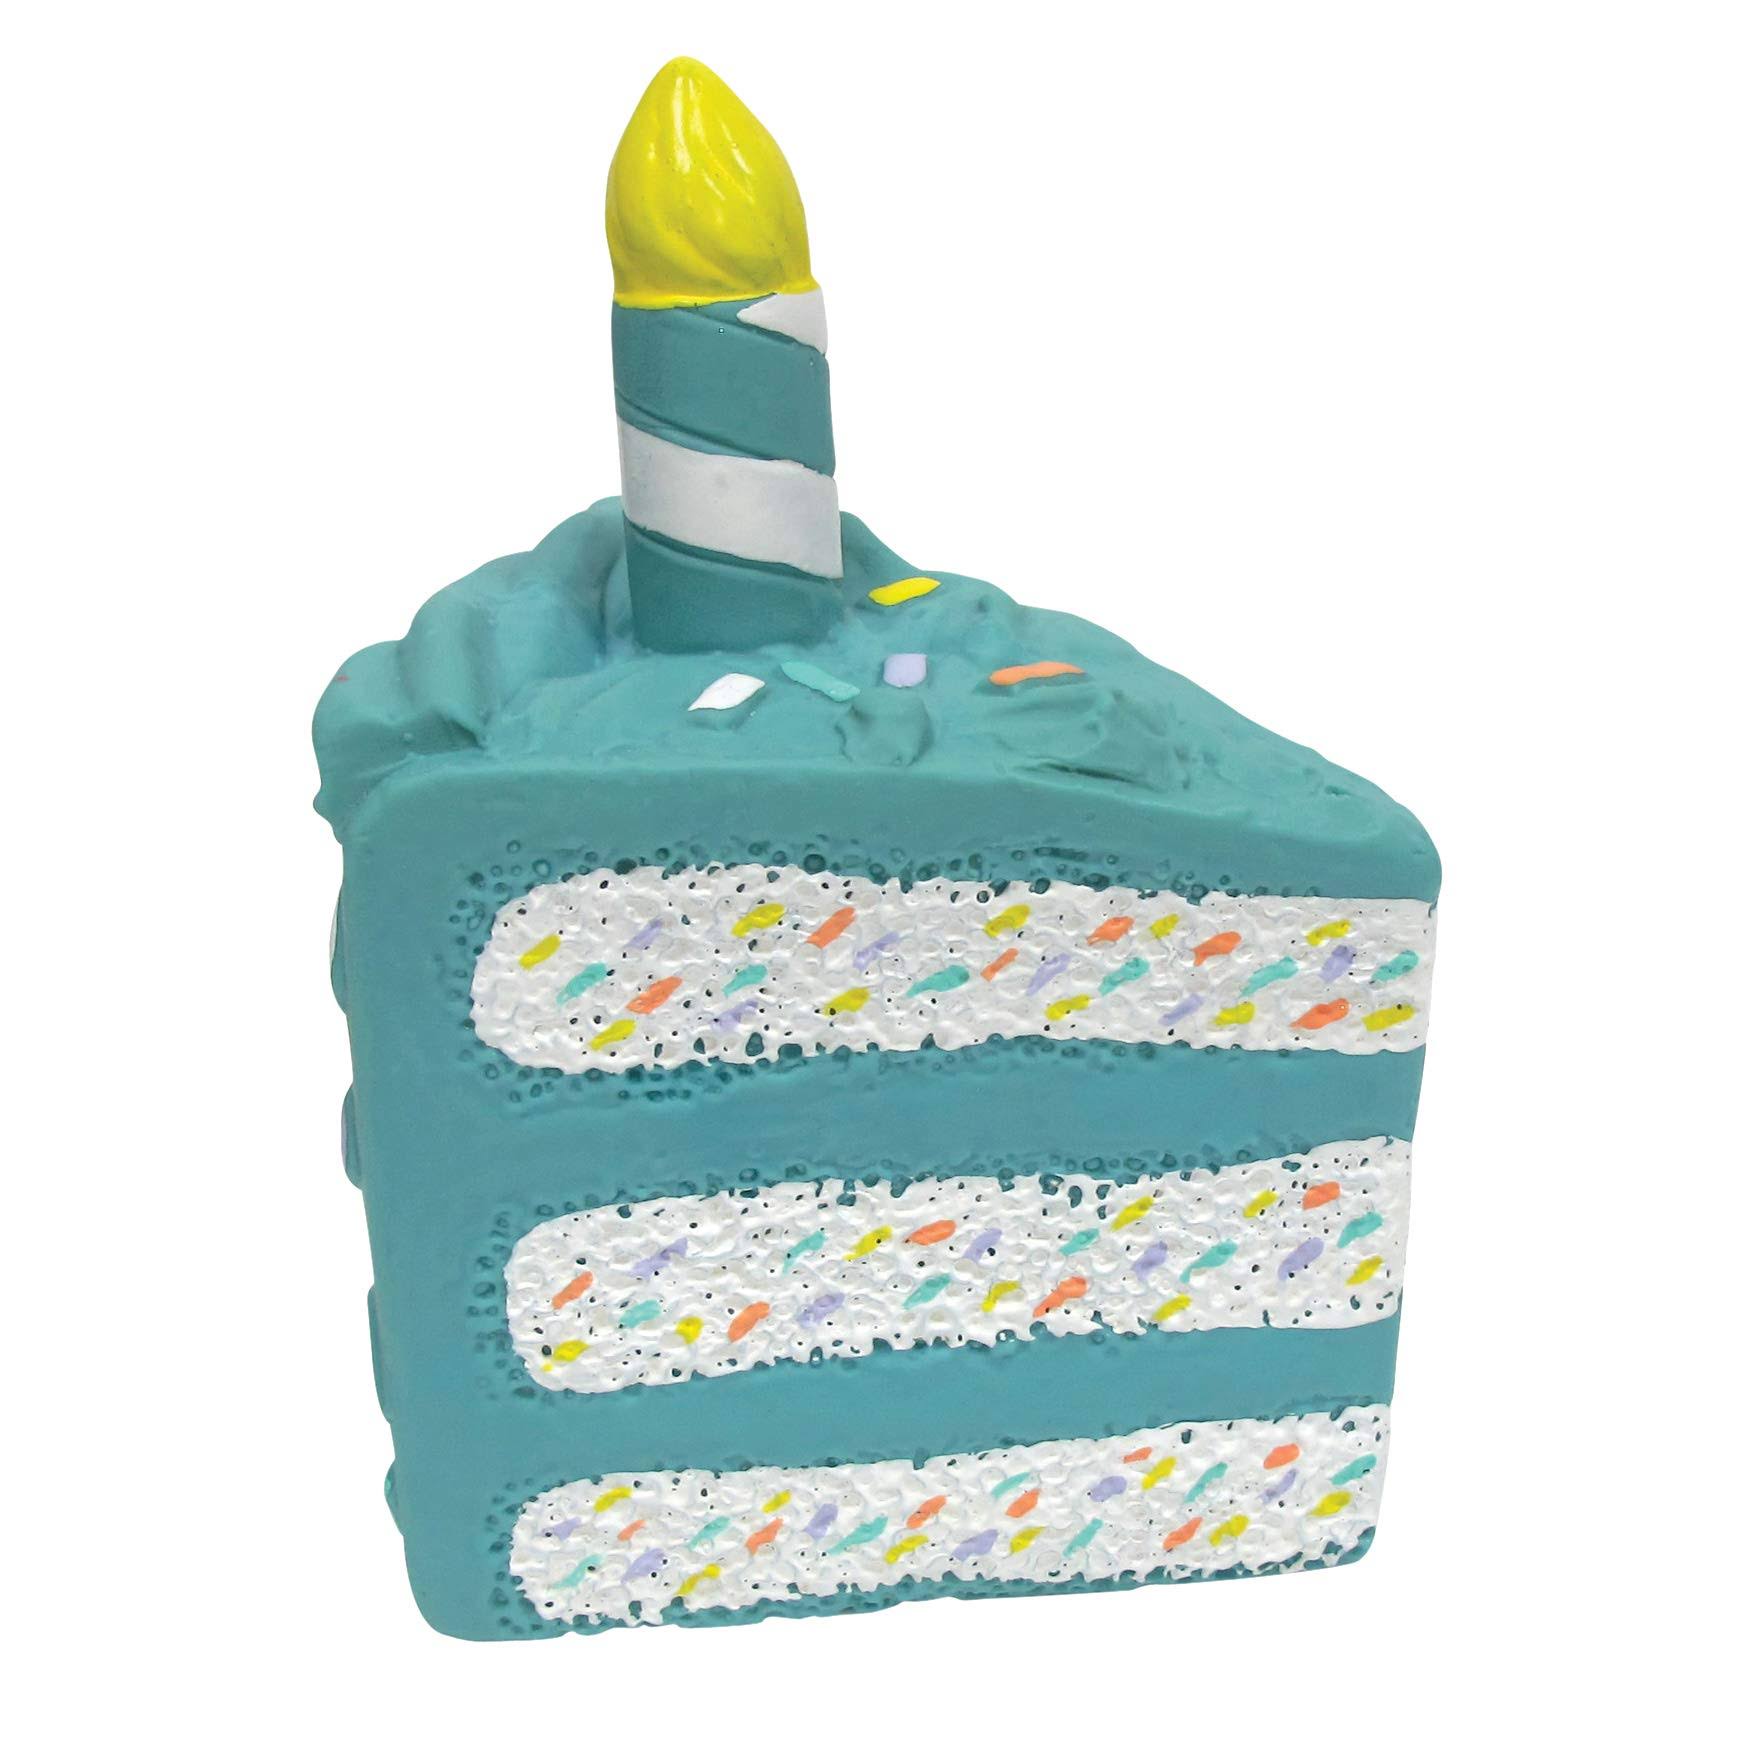 fouFIT 87284 Birthday Cake Chew Toy for Dogs, Blue, 6"